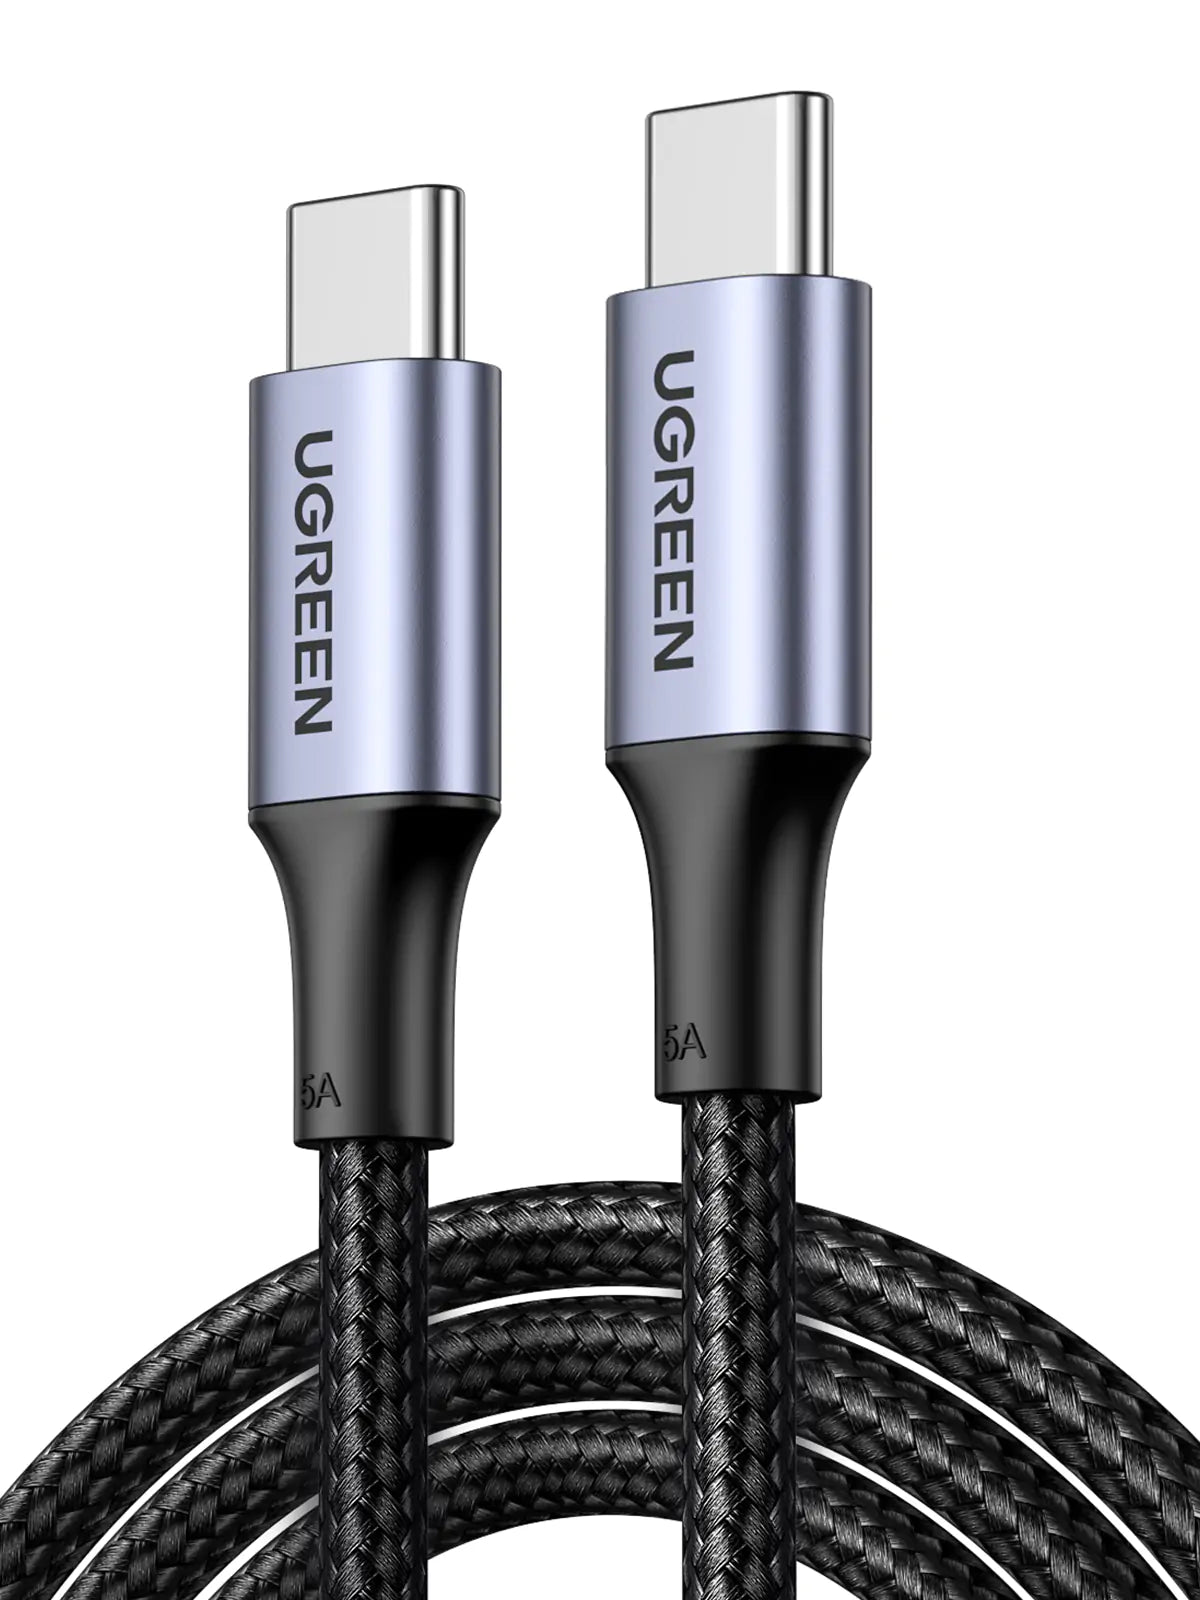 UGREEN USB-C to USB-C 2.0 5A Aluminum Case Charging Cable 2m (Space Gray)